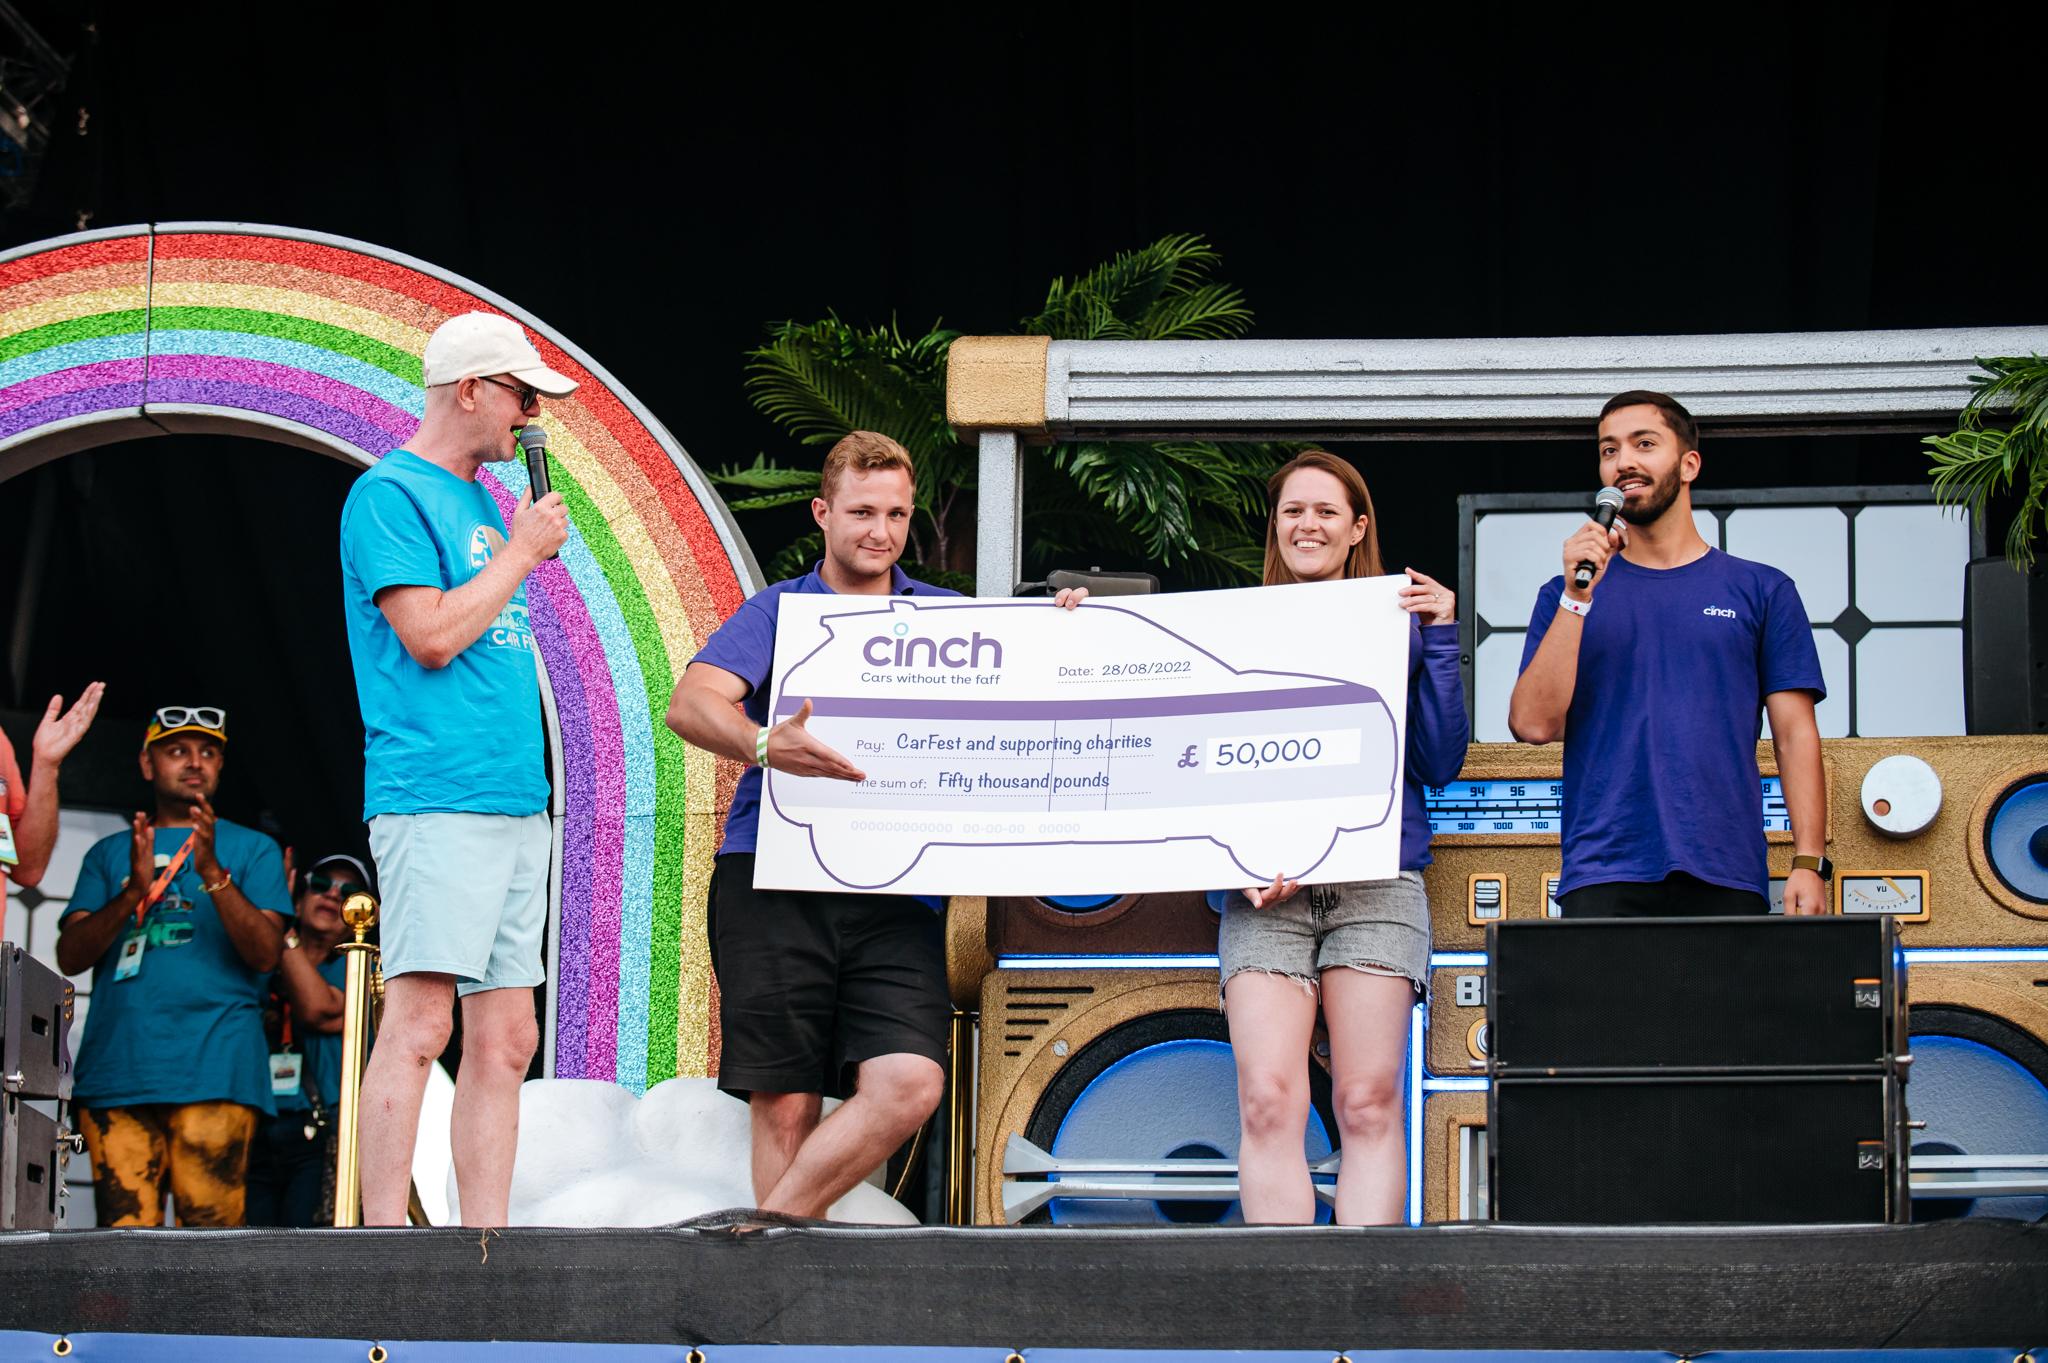 cinch presenting a £50,000 cheque at CarFest 